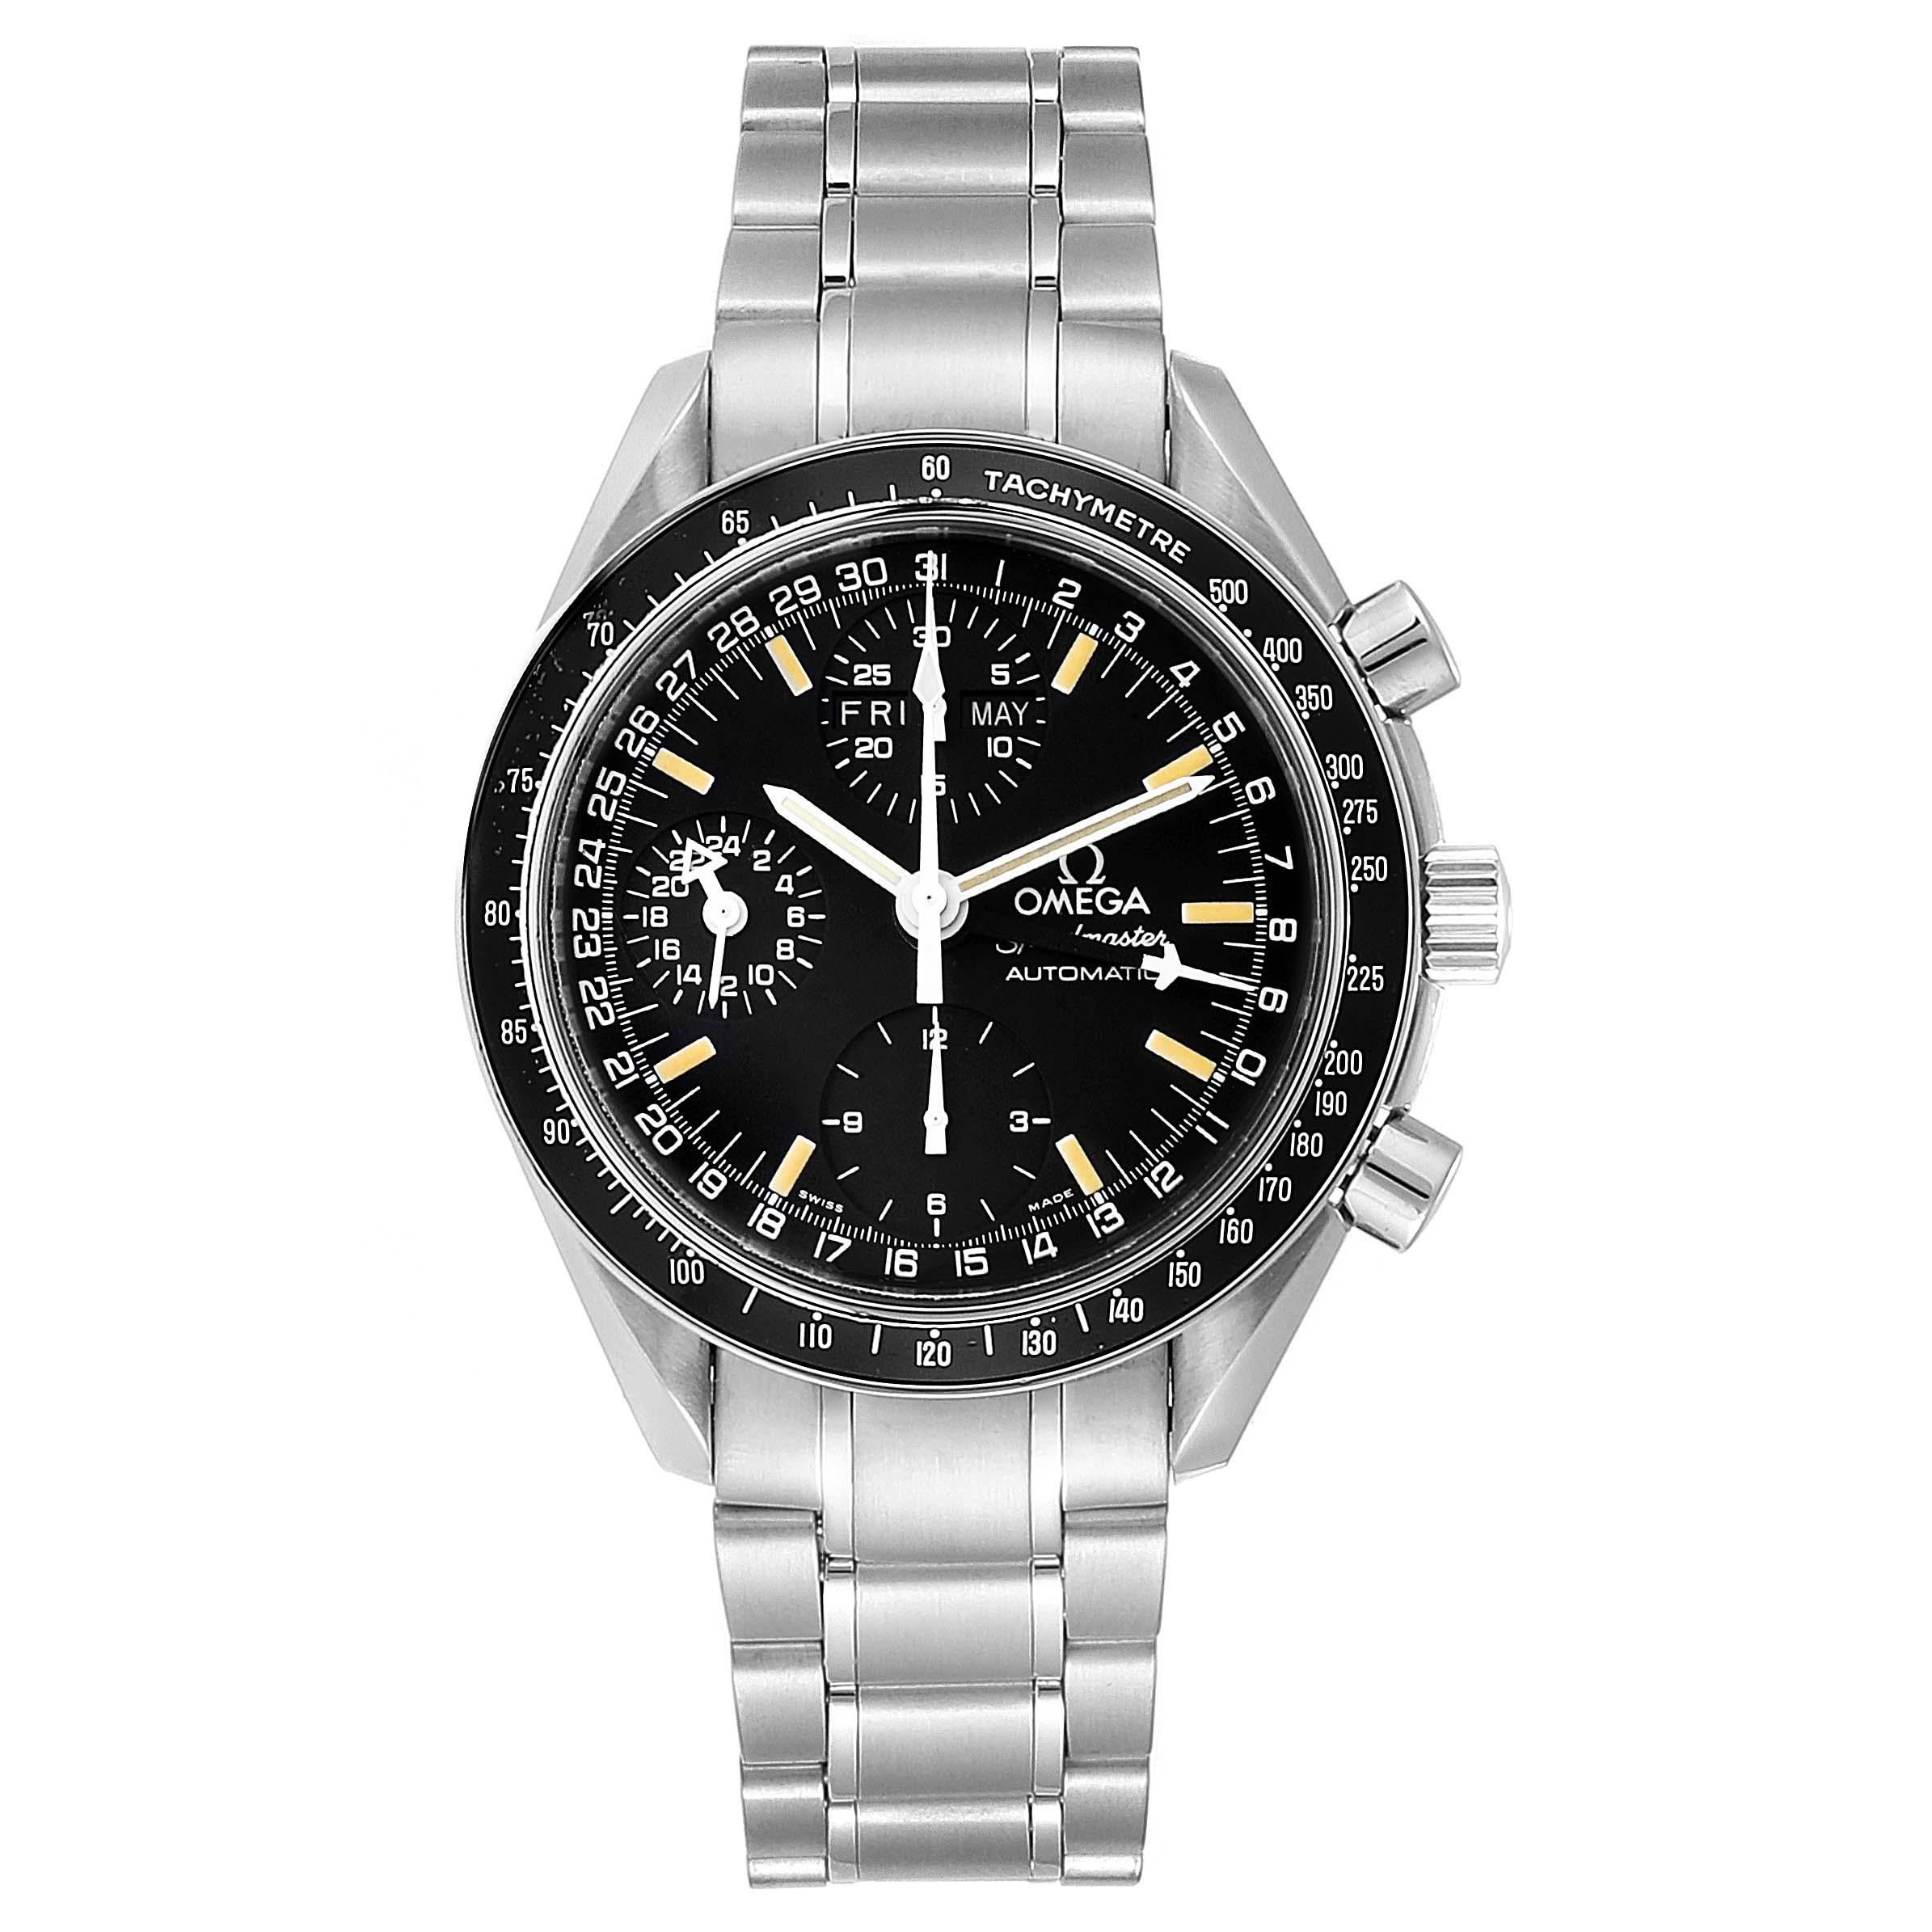 Omega Speedmaster Day Date Black Dial Automatic Mens Watch 3520.50.00. Authomatic self-winding movement. Stainless steel round case 39.0 mm in diameter. Stainless steel bezel with tachimeter function. Anti-reflective scratch resistant sapphire